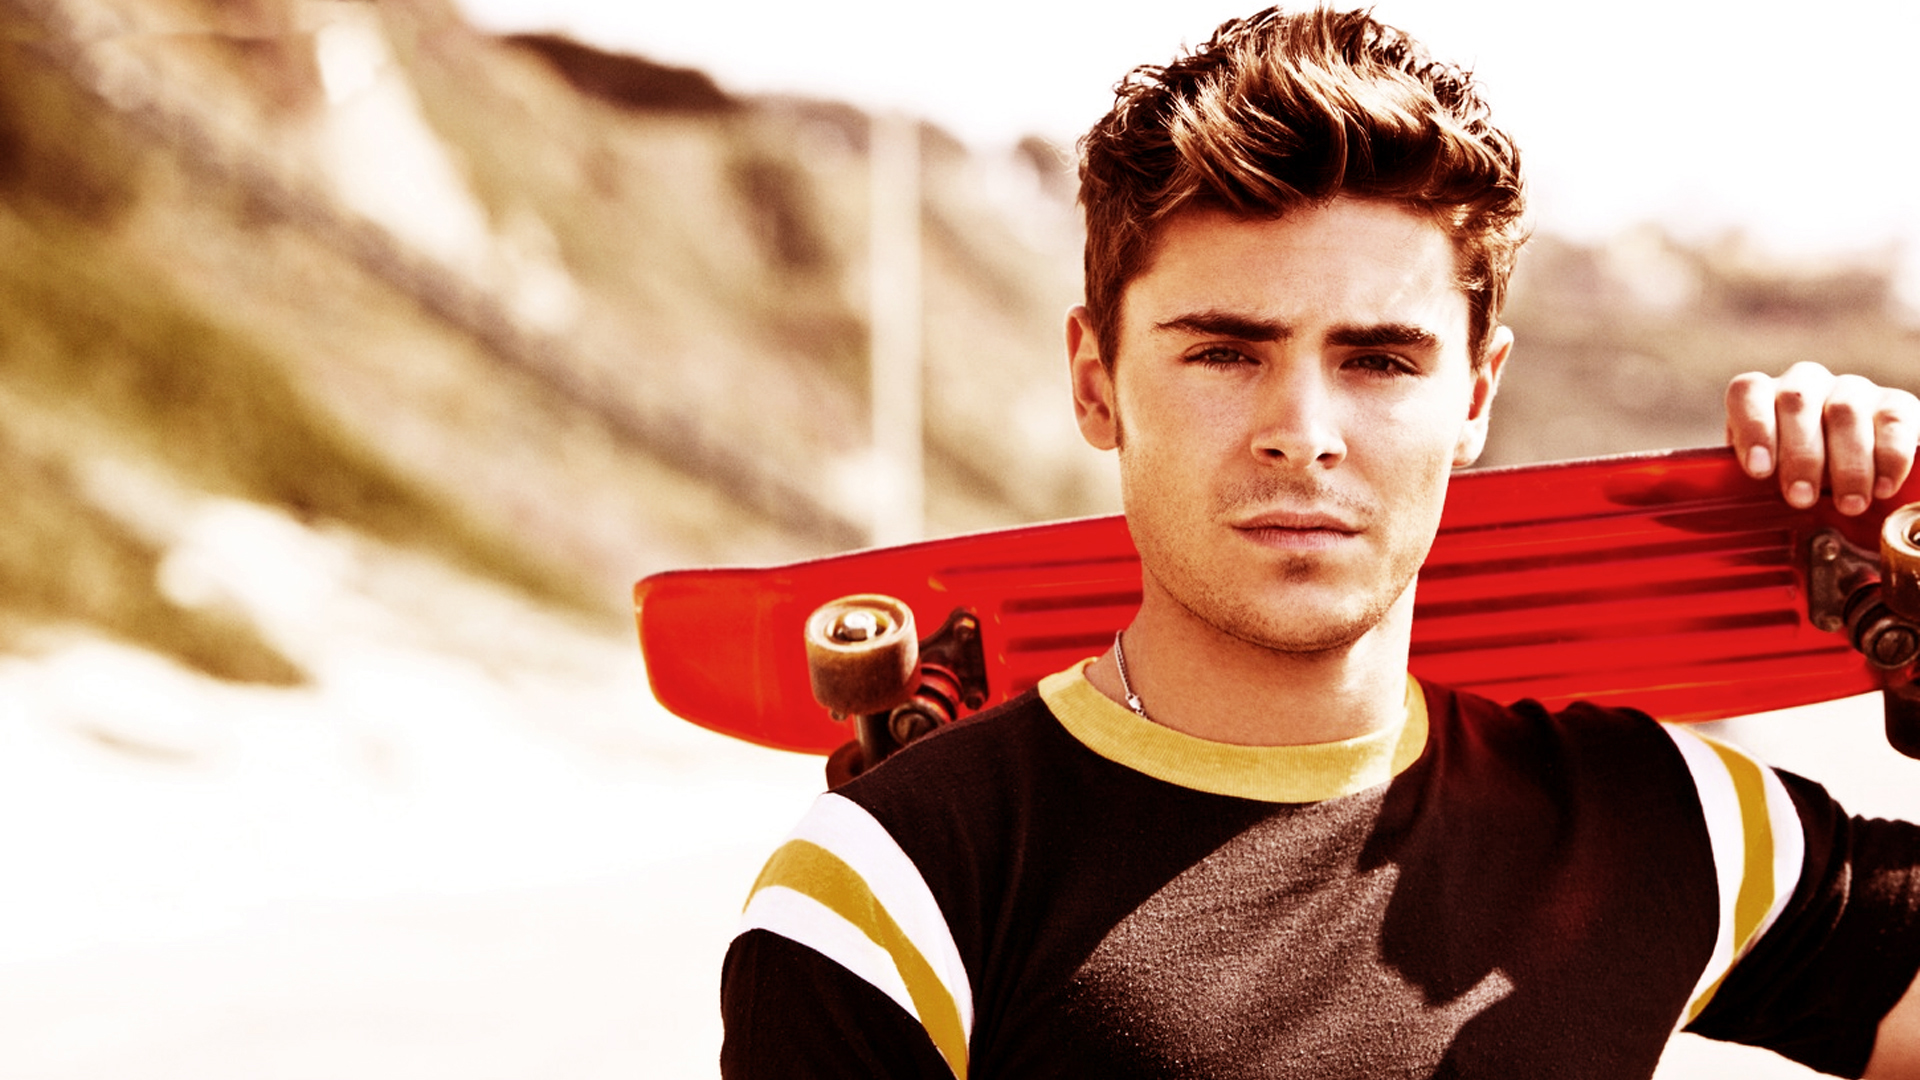 Zac Efron Wallpaper 69 images